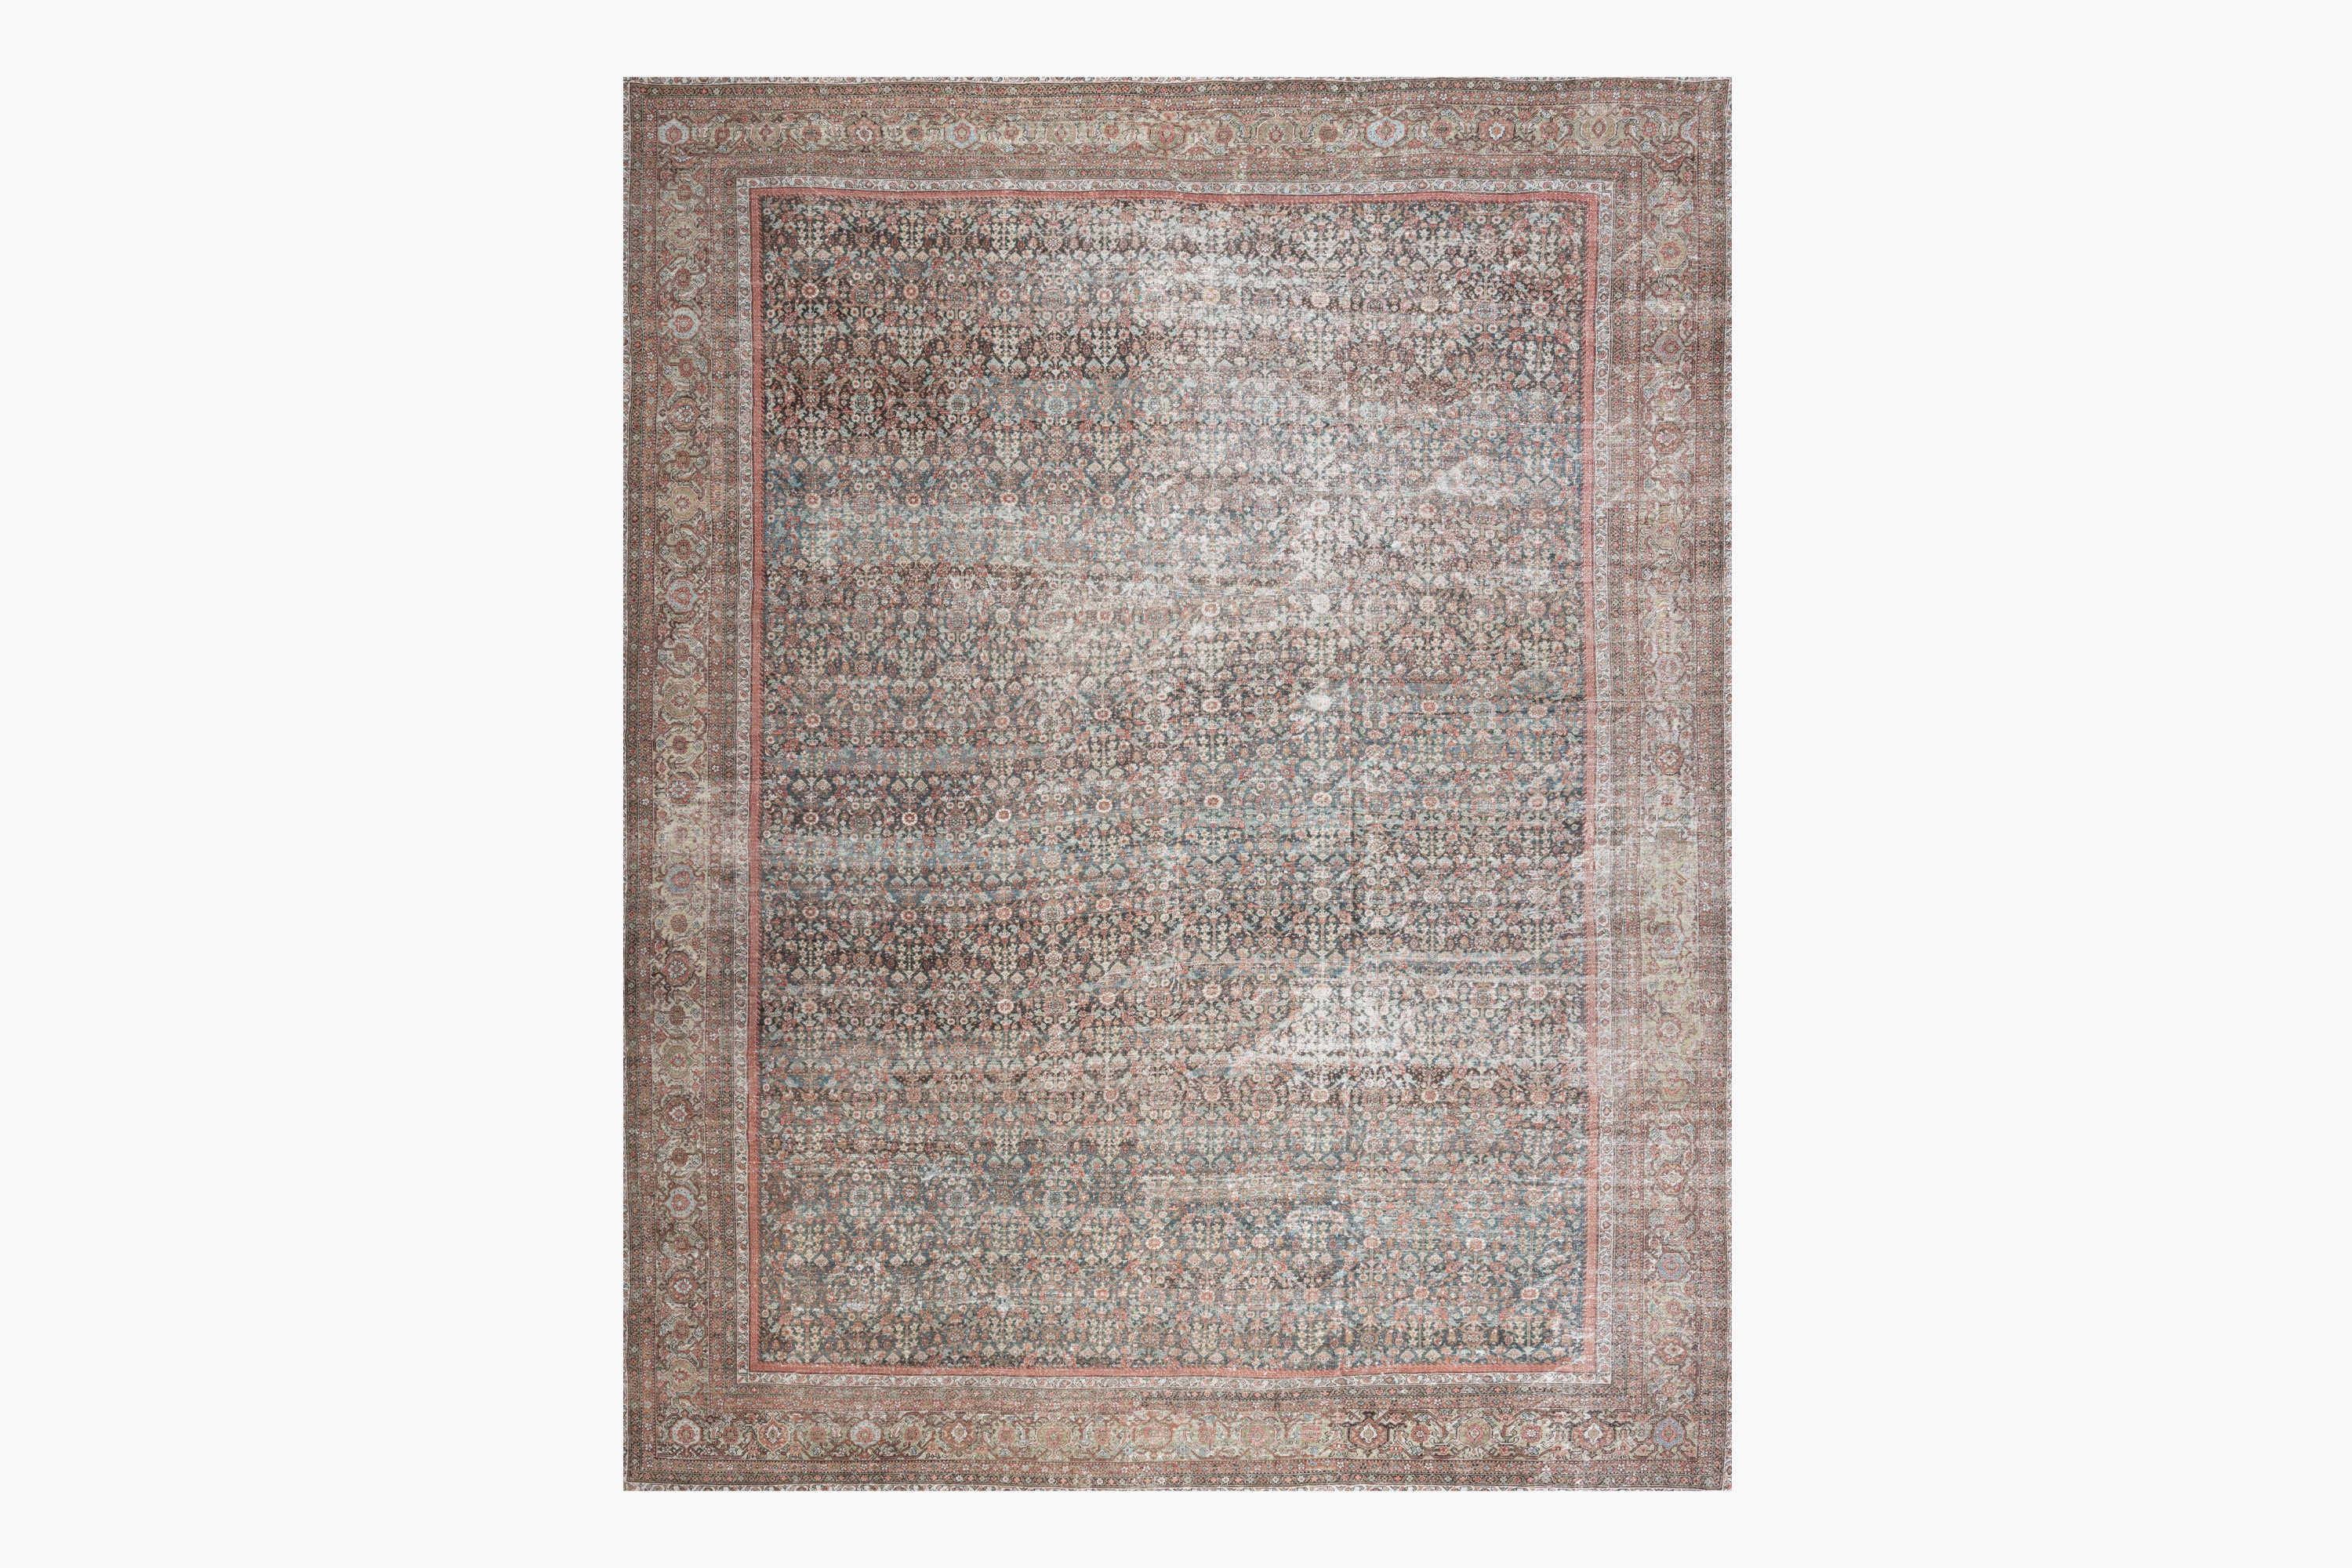 SULTANABAD RUG, AR31268, WEST PERSIA, 15'3" X 24'4" - thumbnail 1